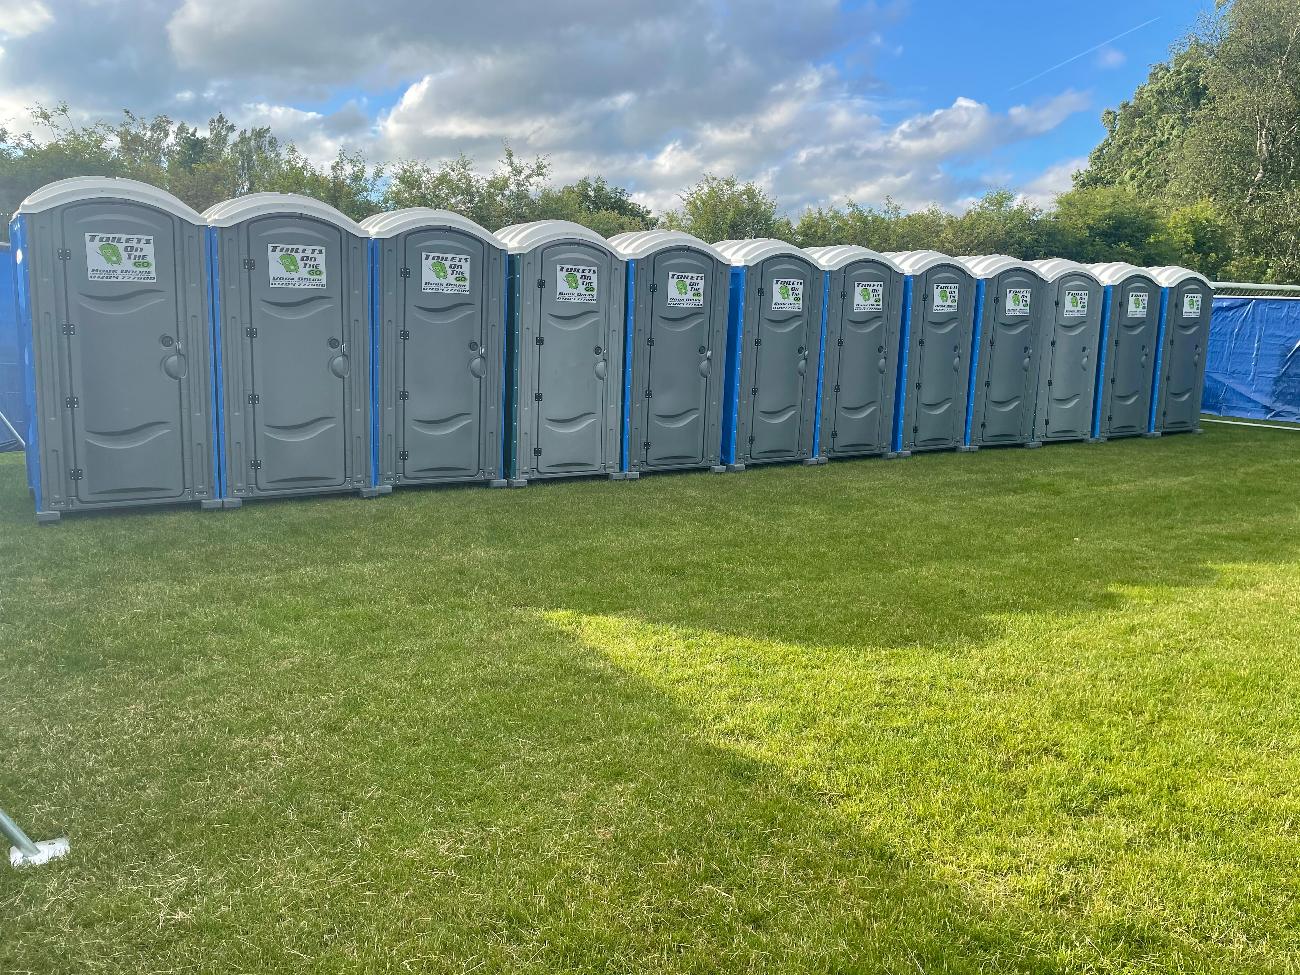 Gallery | Portable Toilet Loo Hire Rental Company in North West uk and Manchester gallery image 23